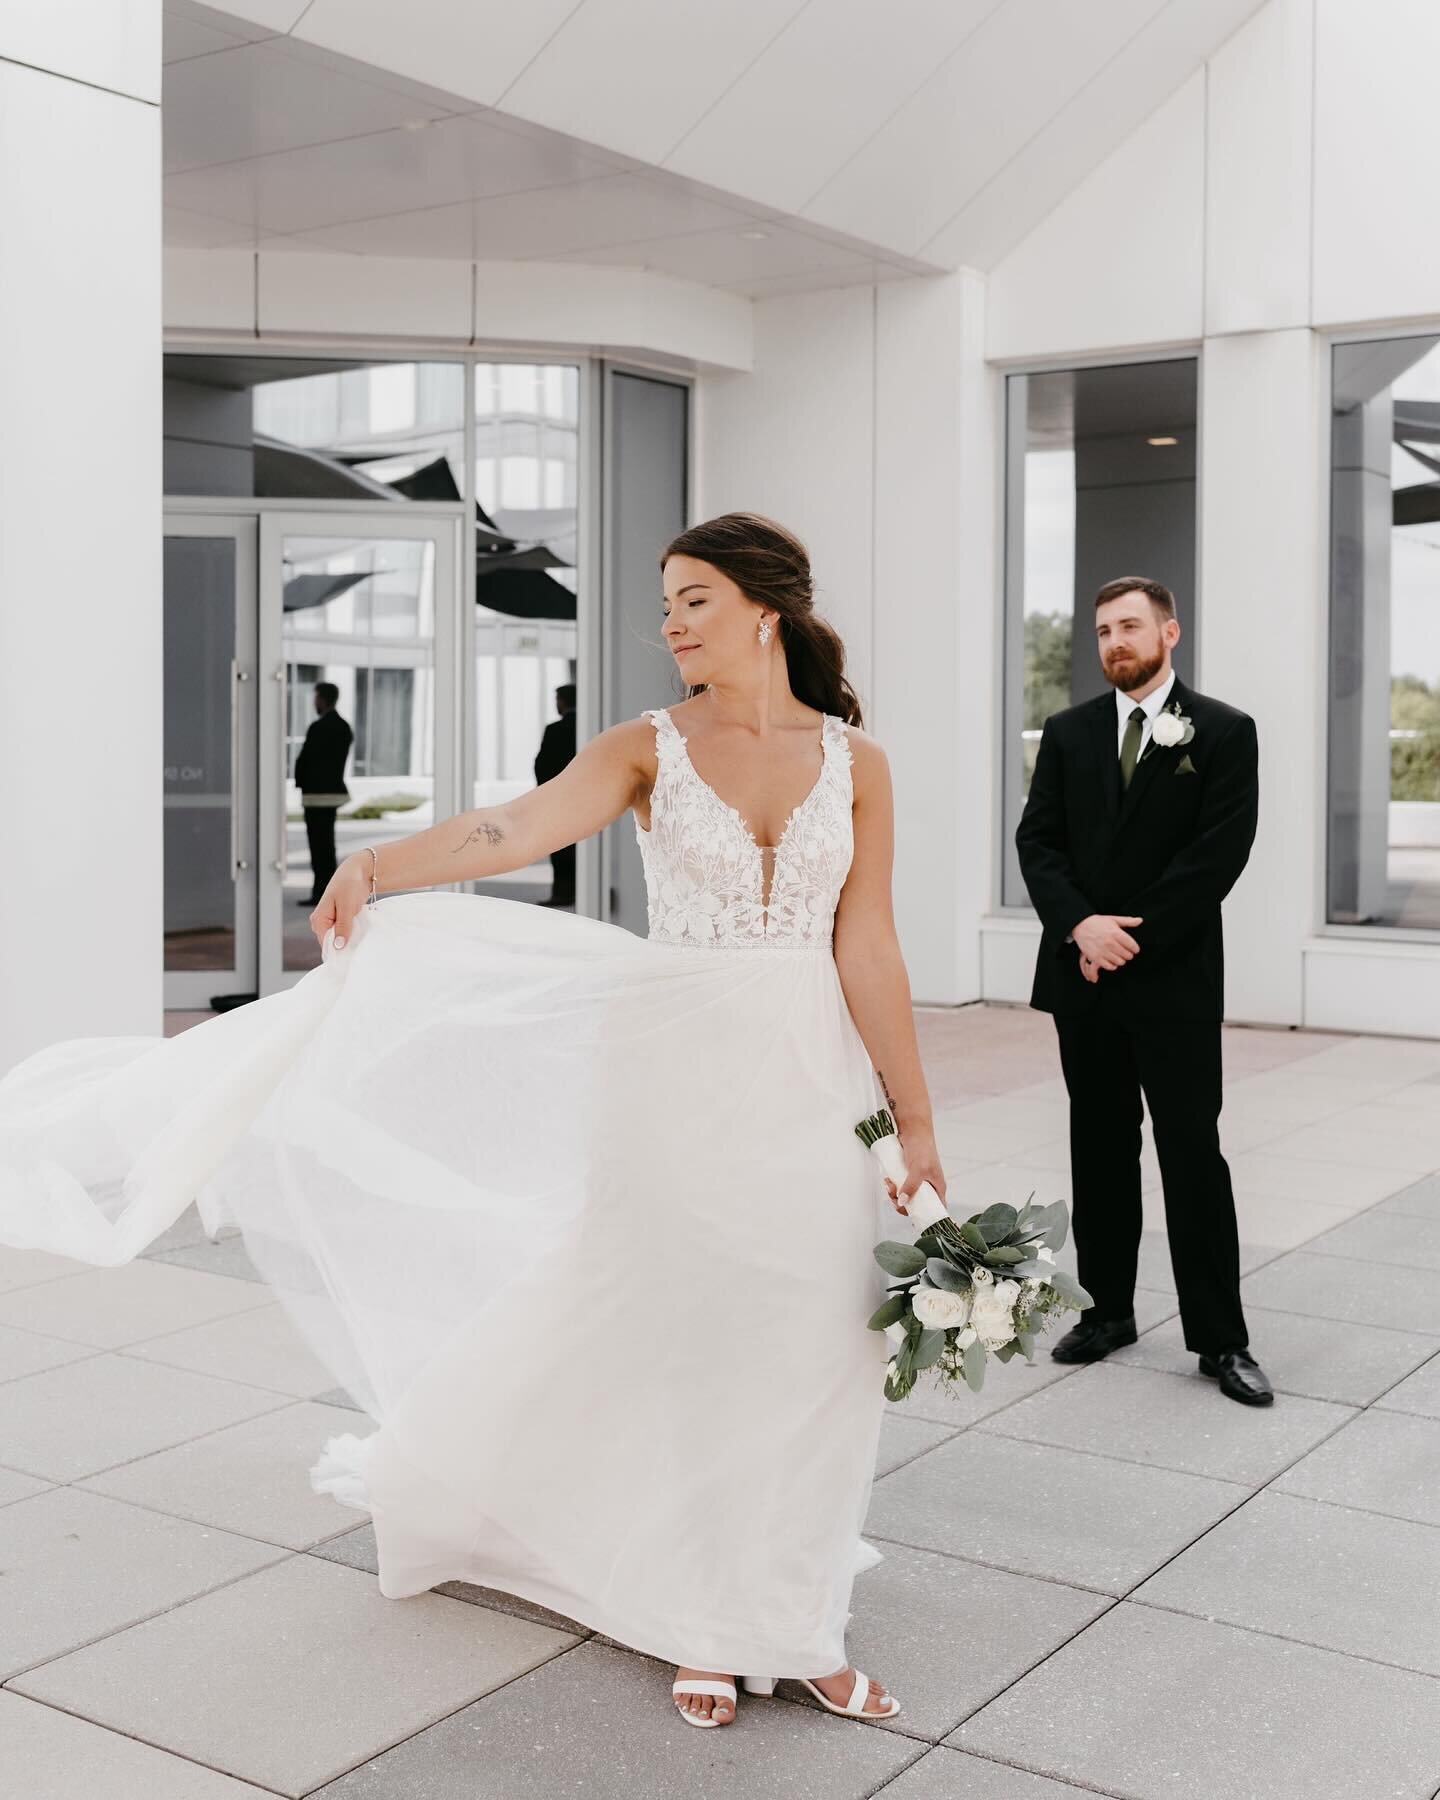 Kasey &amp; Brandon have been together for 10 years and their wedding day was such a fun celebration of their love 🤍

Venue: @madtreebrewing 
Hotel: @the_summit_hotel 
Photo: @meganstottsphoto 
Coordinator: @everydayoccasionsbykelsey 
Florals: @flow